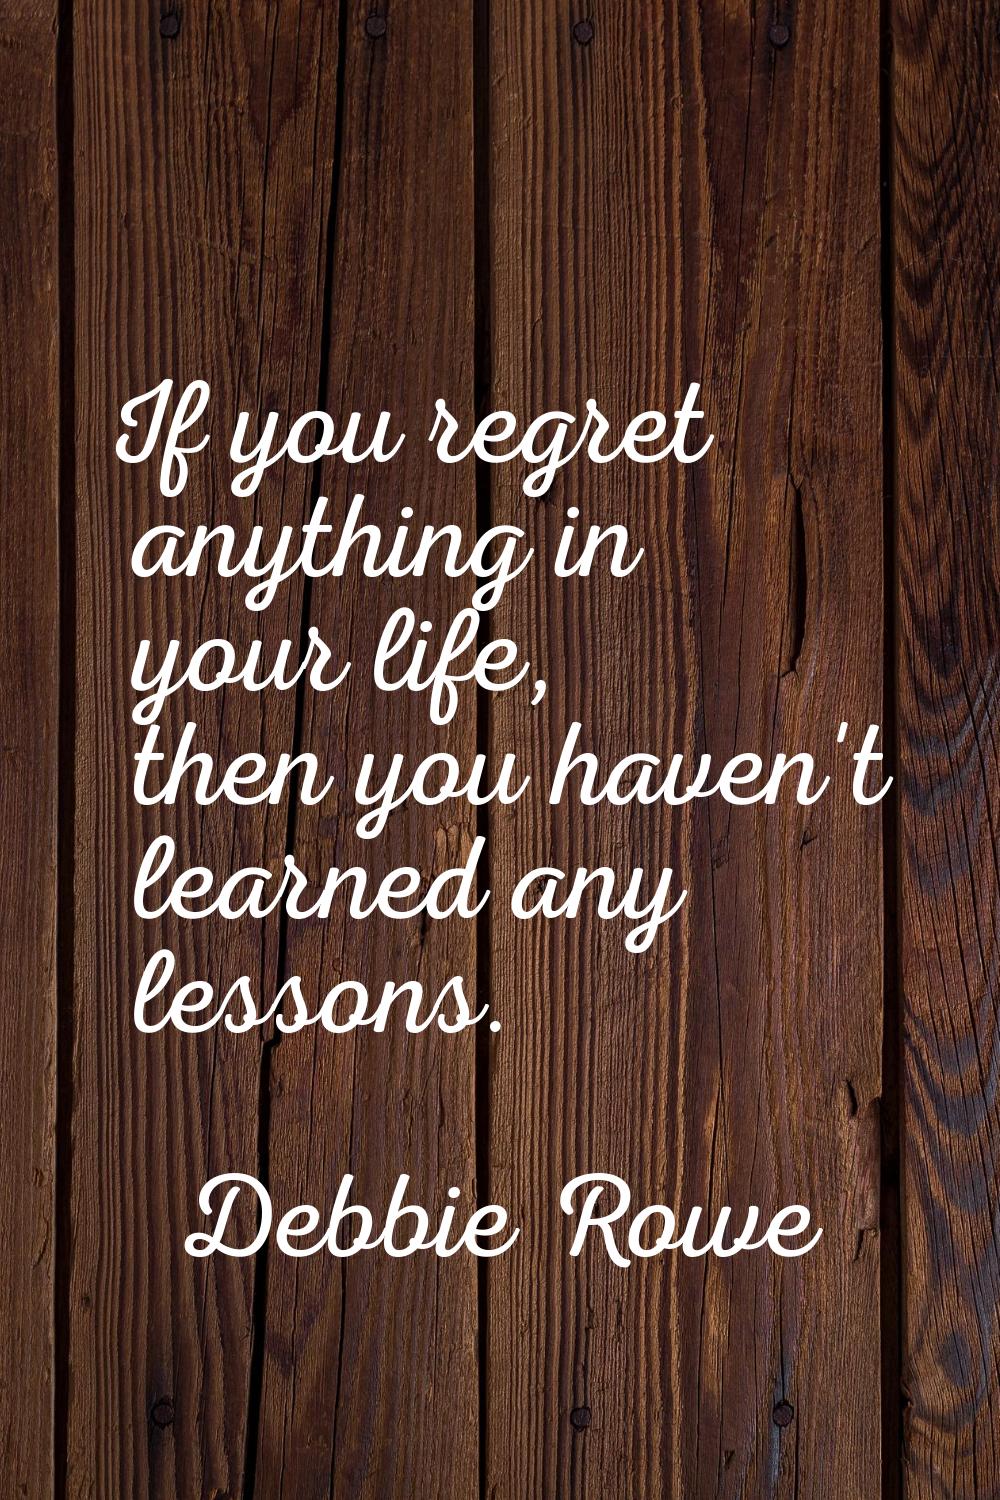 If you regret anything in your life, then you haven't learned any lessons.